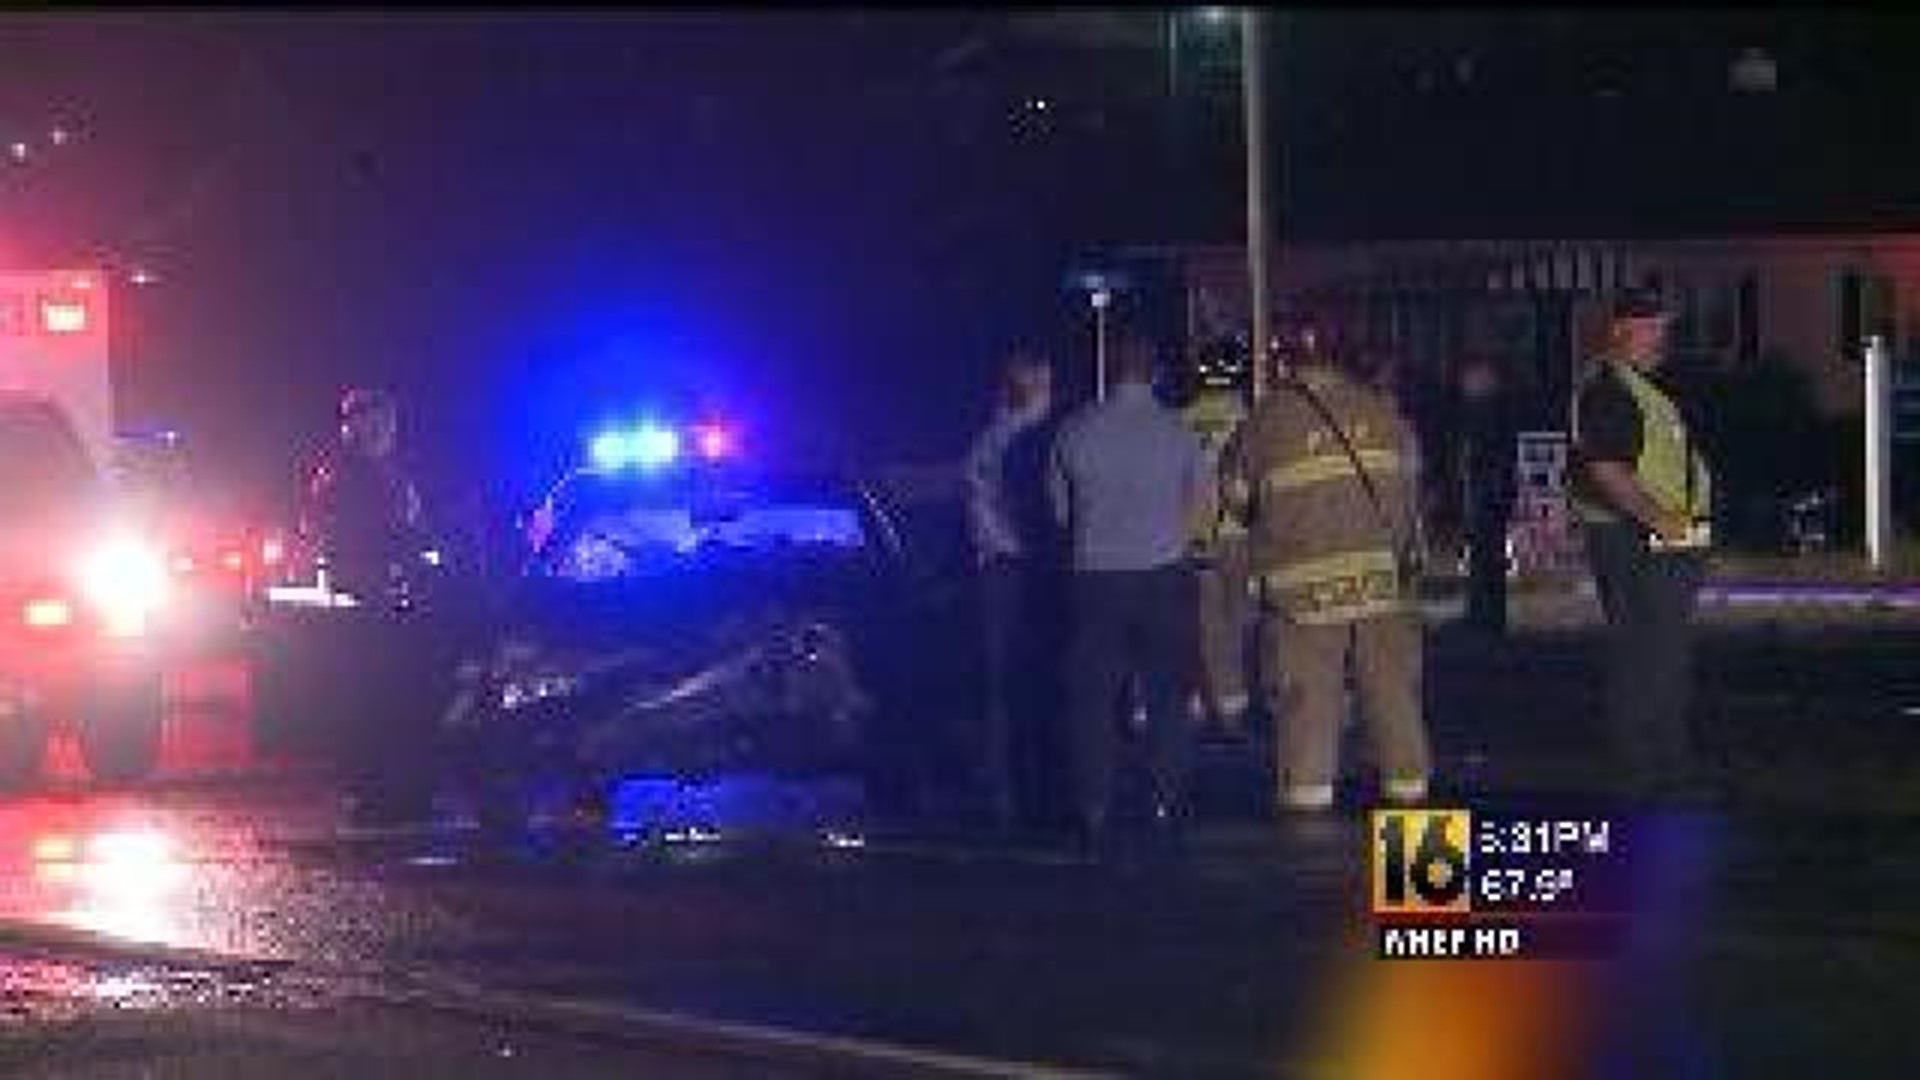 Group Petitions PennDOT for Roadway Safety Review After Deadly Wreck